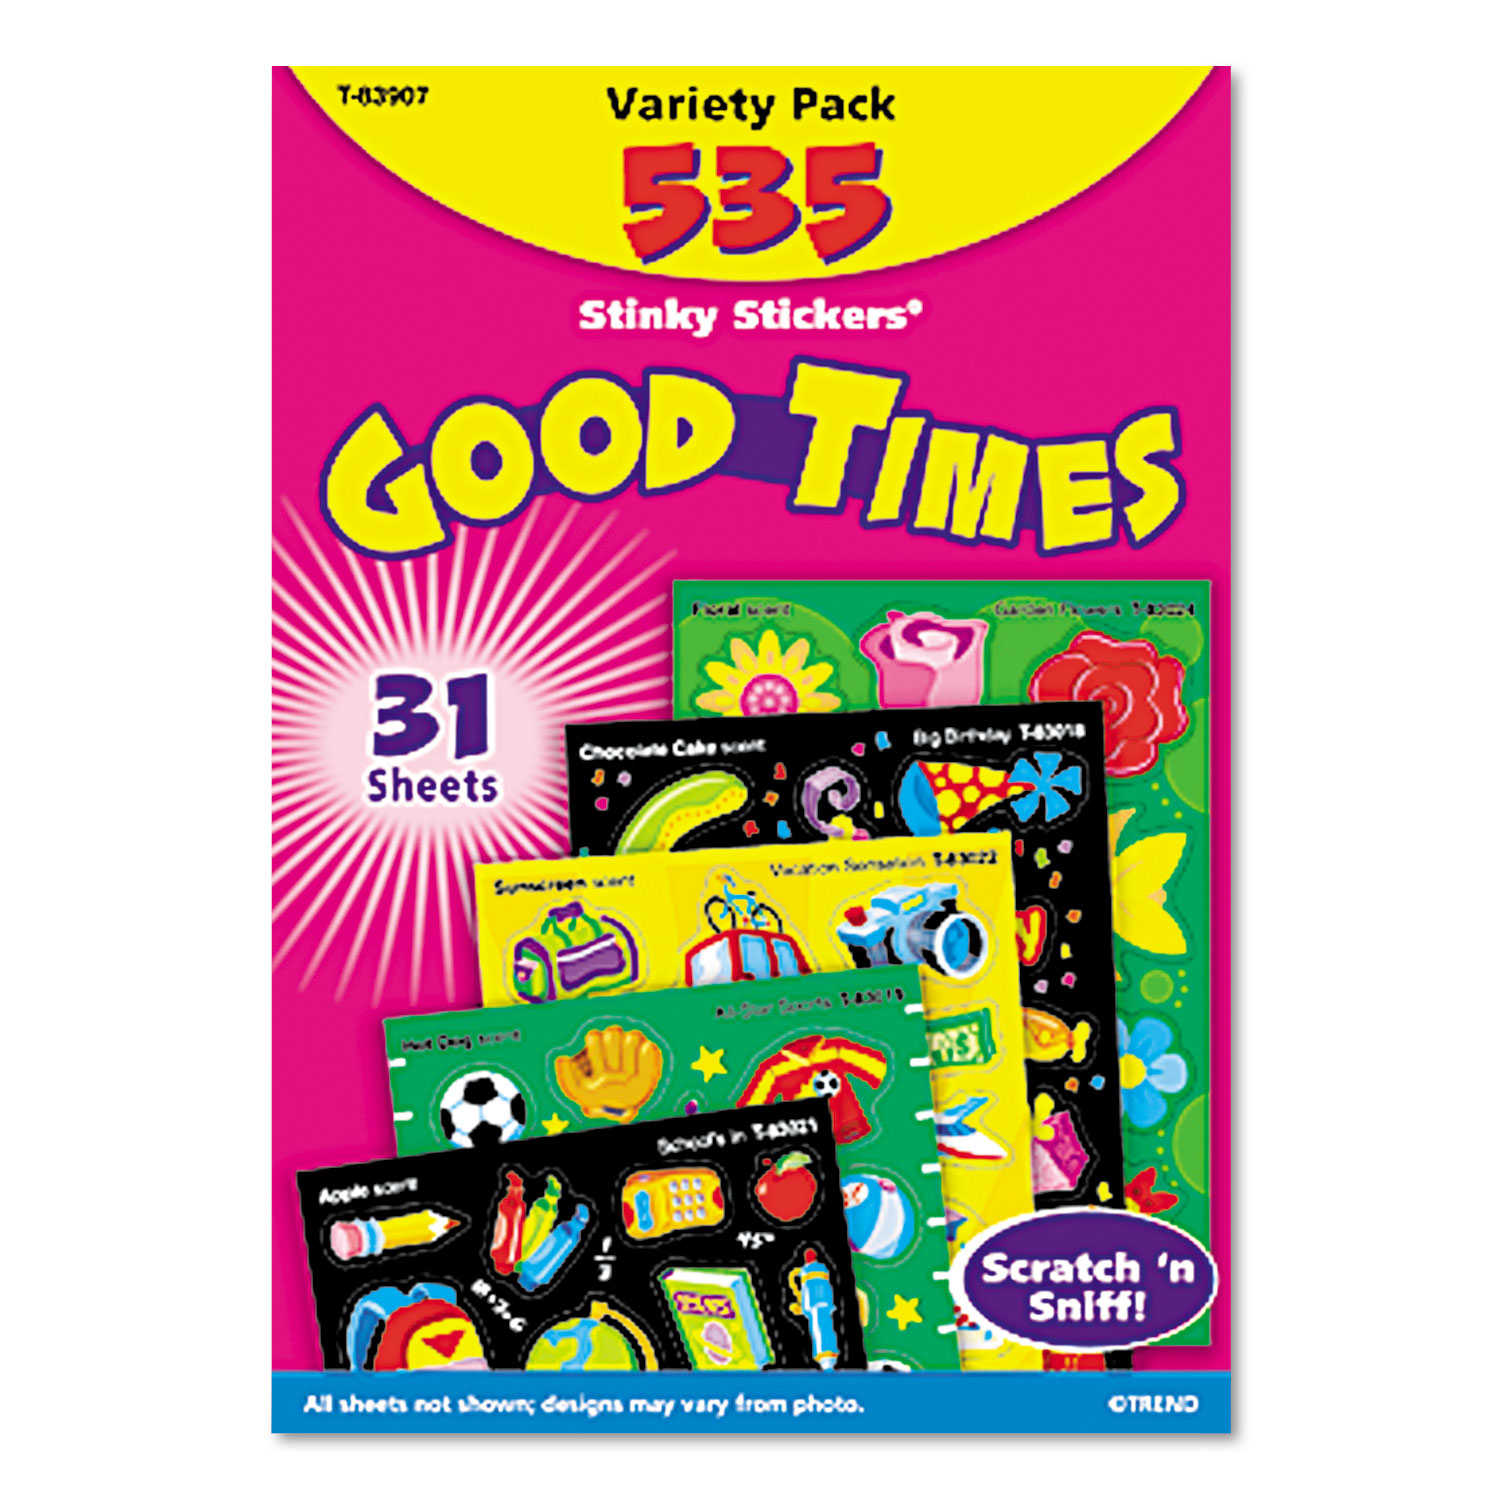 Stinky Stickers Variety Pack, Good Times, 535/Pack